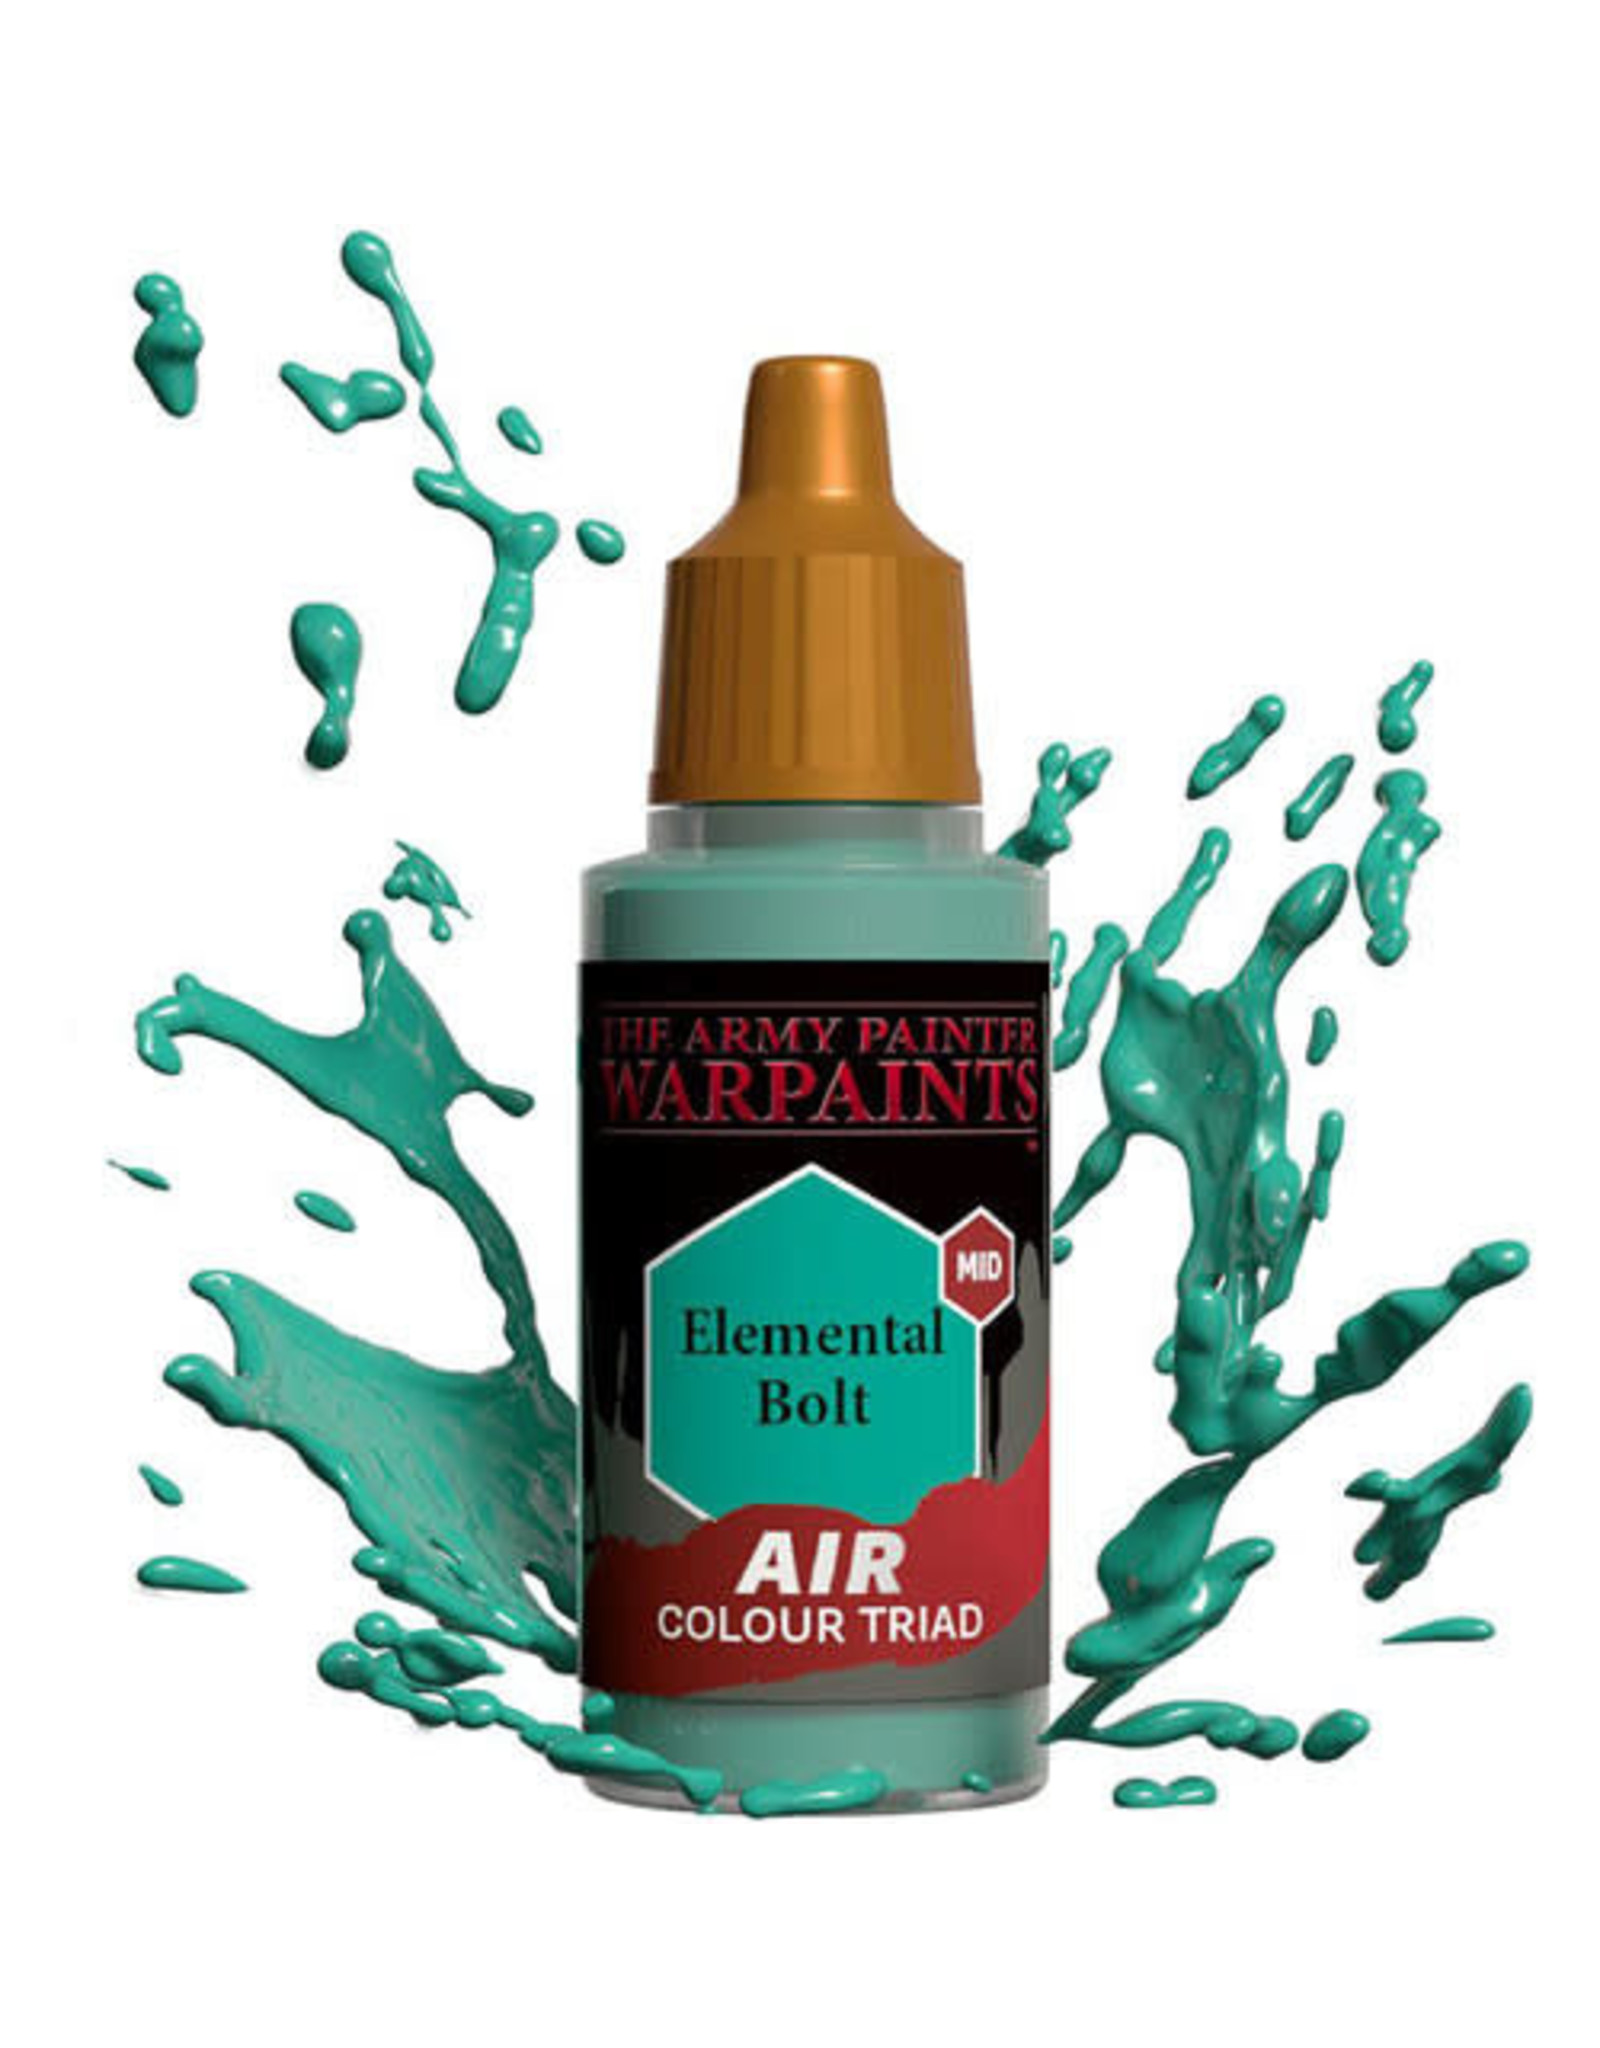 The Army Painter AW1419 Elemental Bolt